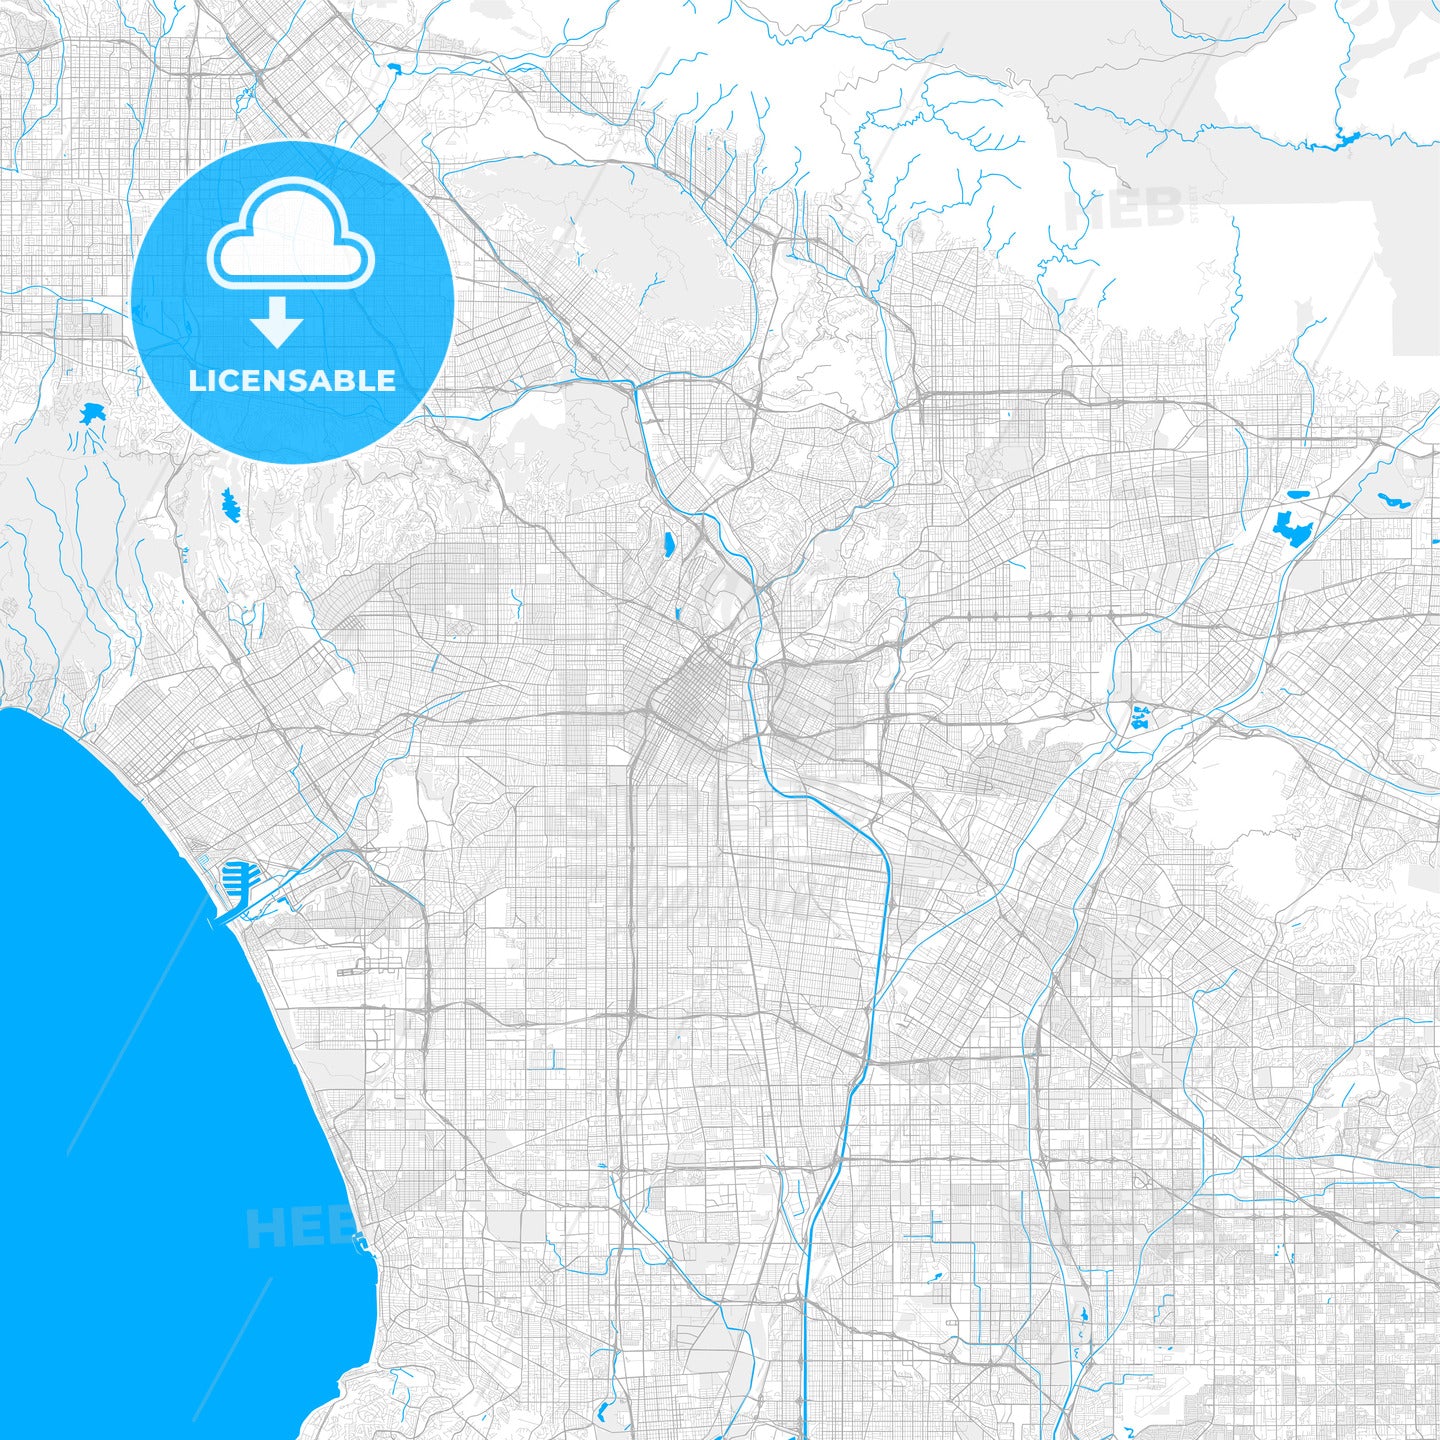 Rich detailed vector map of Los Angeles, California, U.S.A.